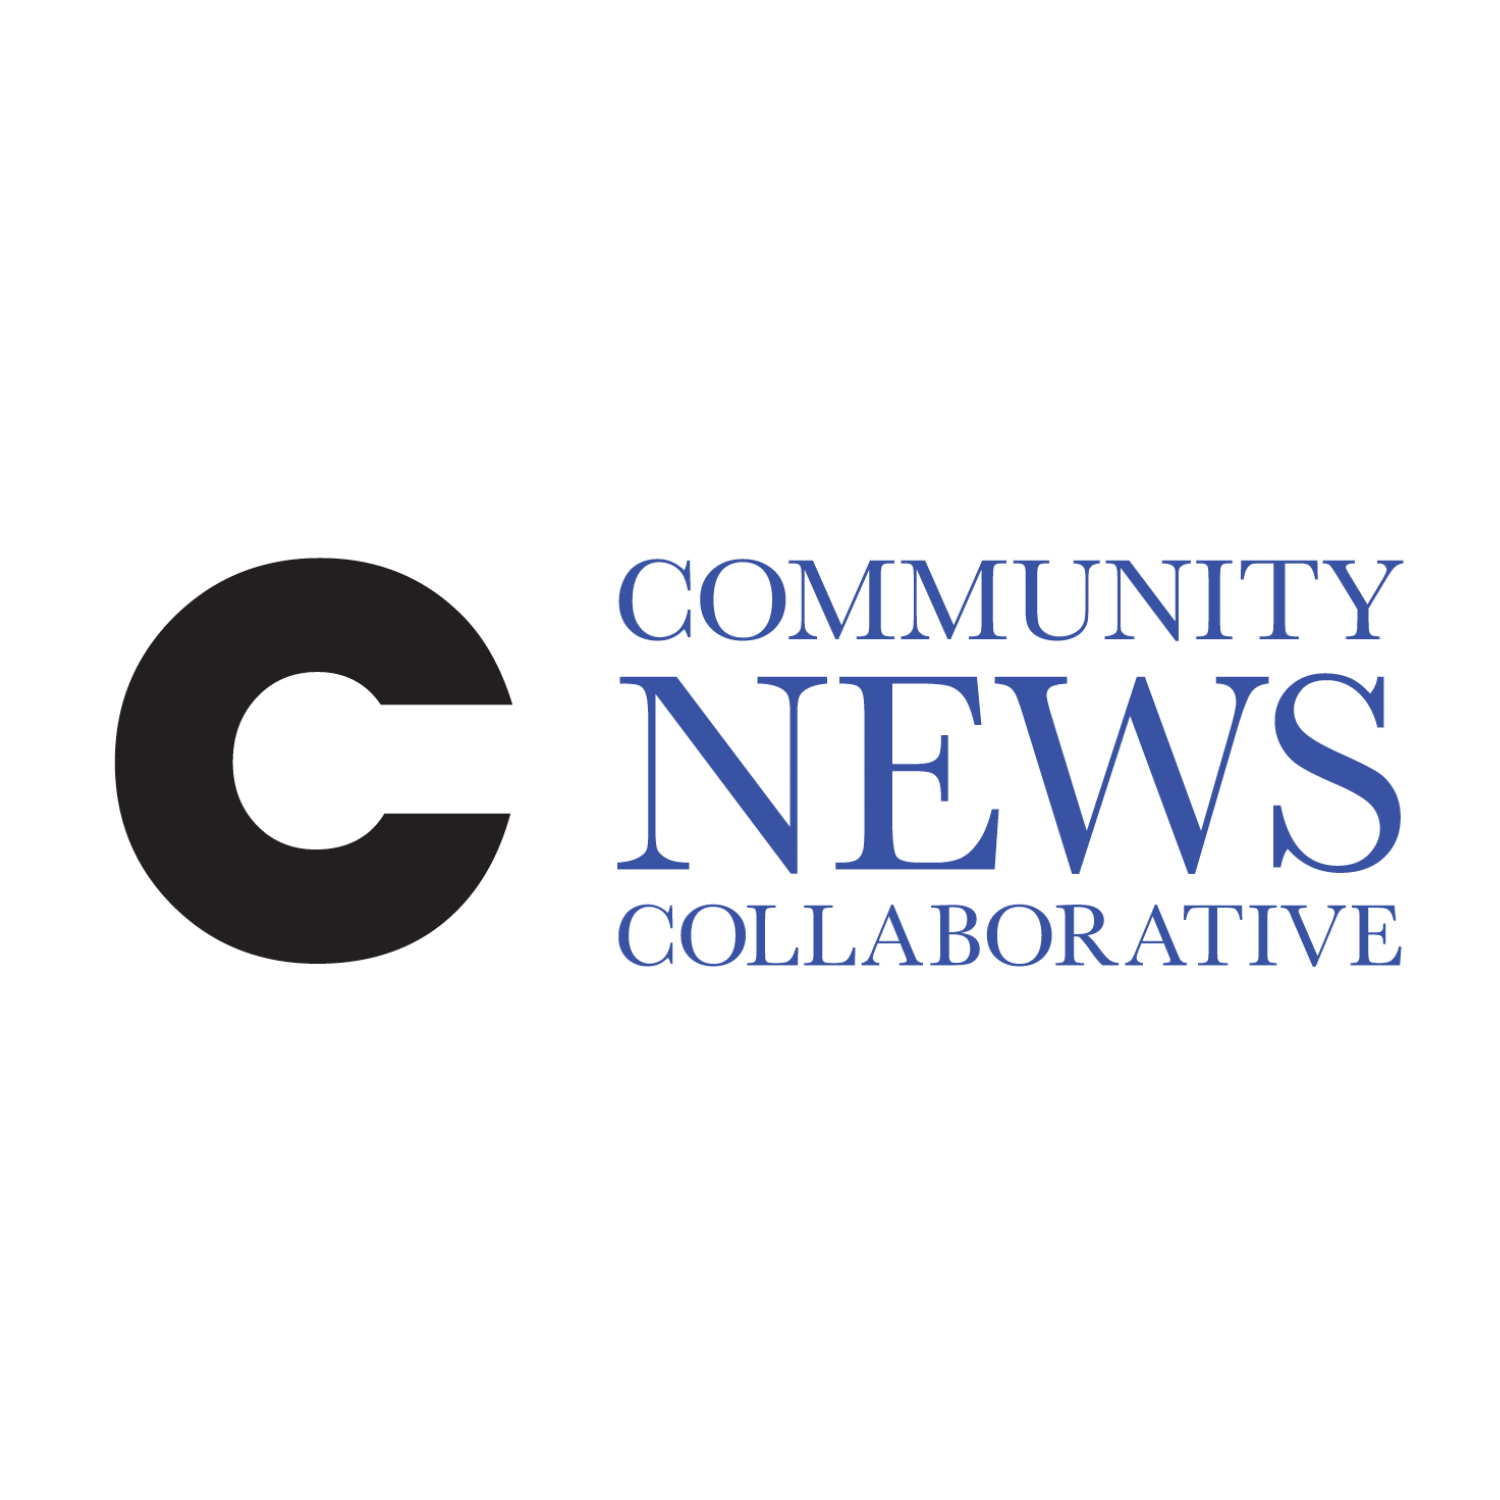 Florida collaborative seeks to increase news coverage of underserved Gulf Coast counties